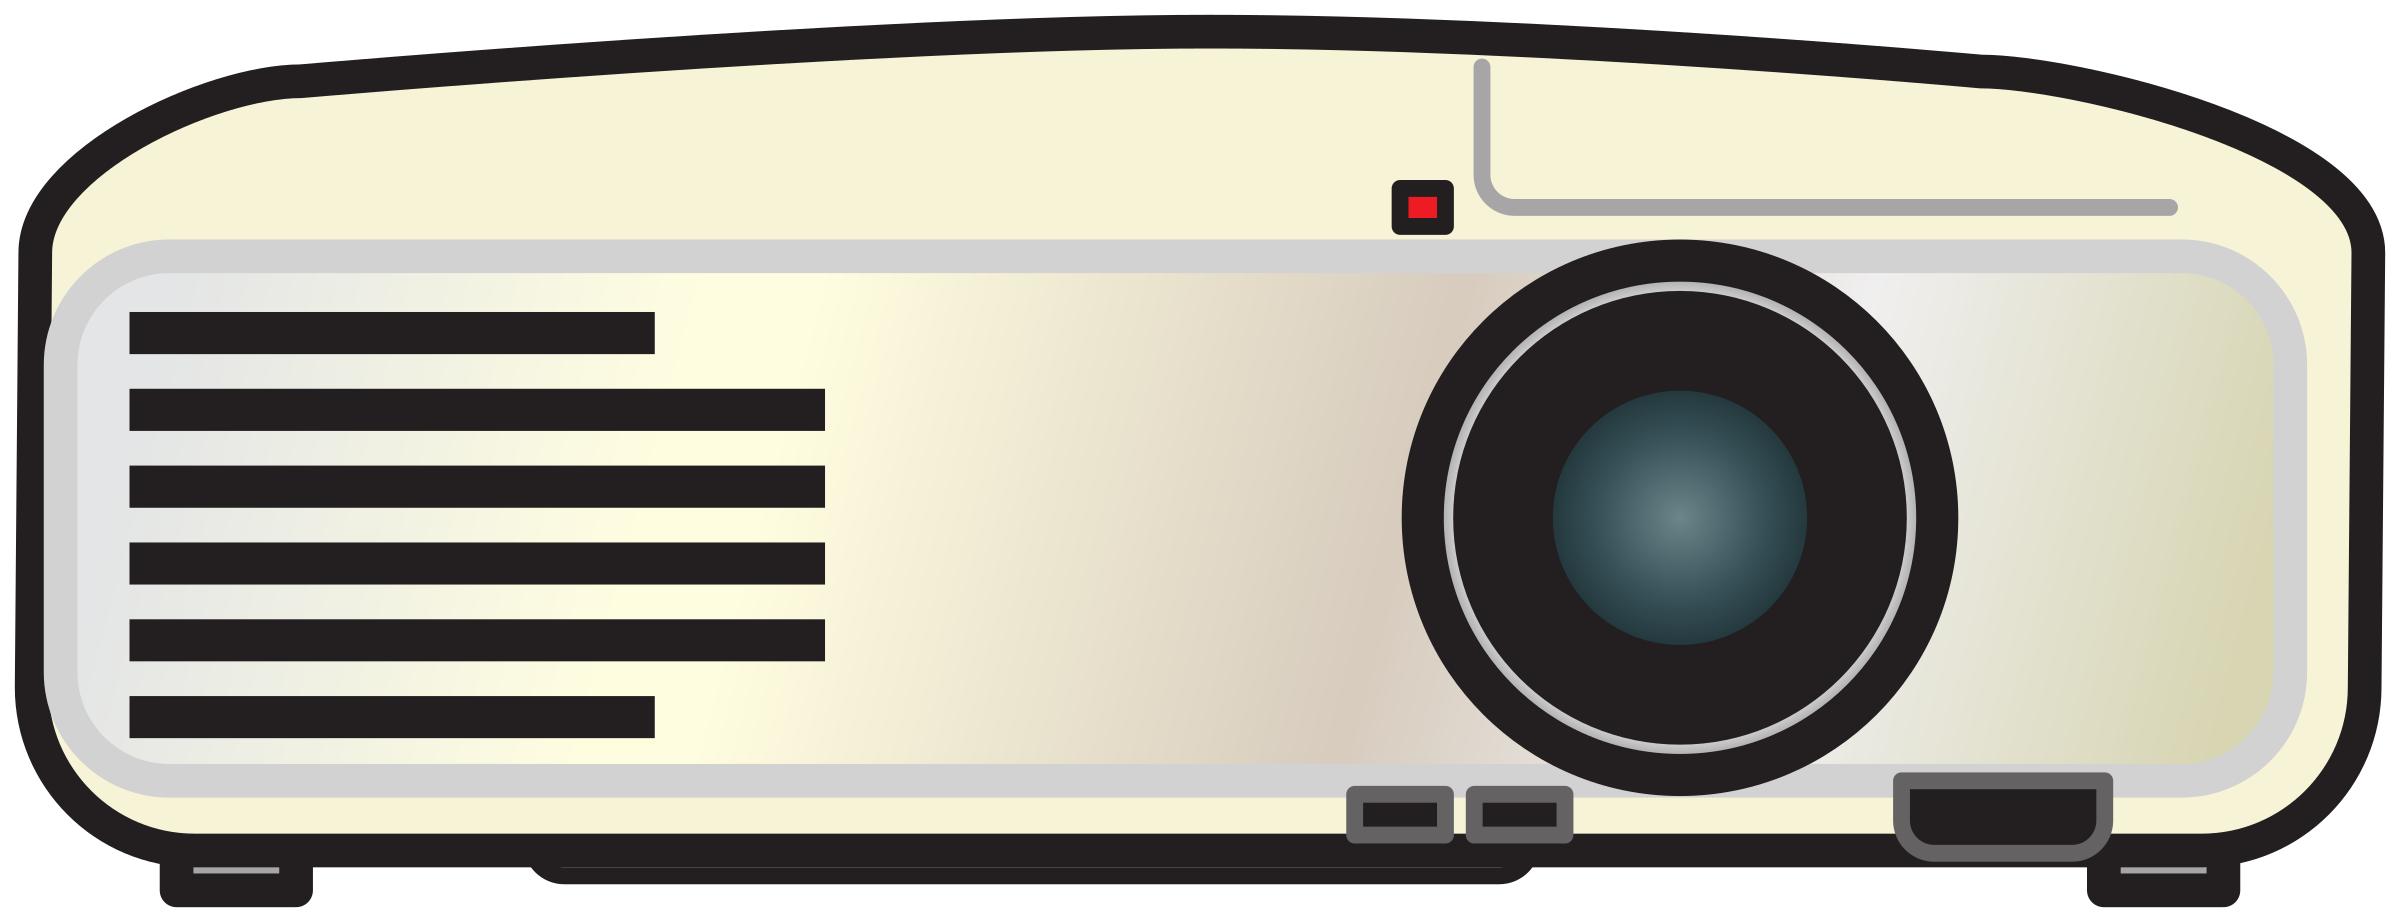 Video projector - table version png